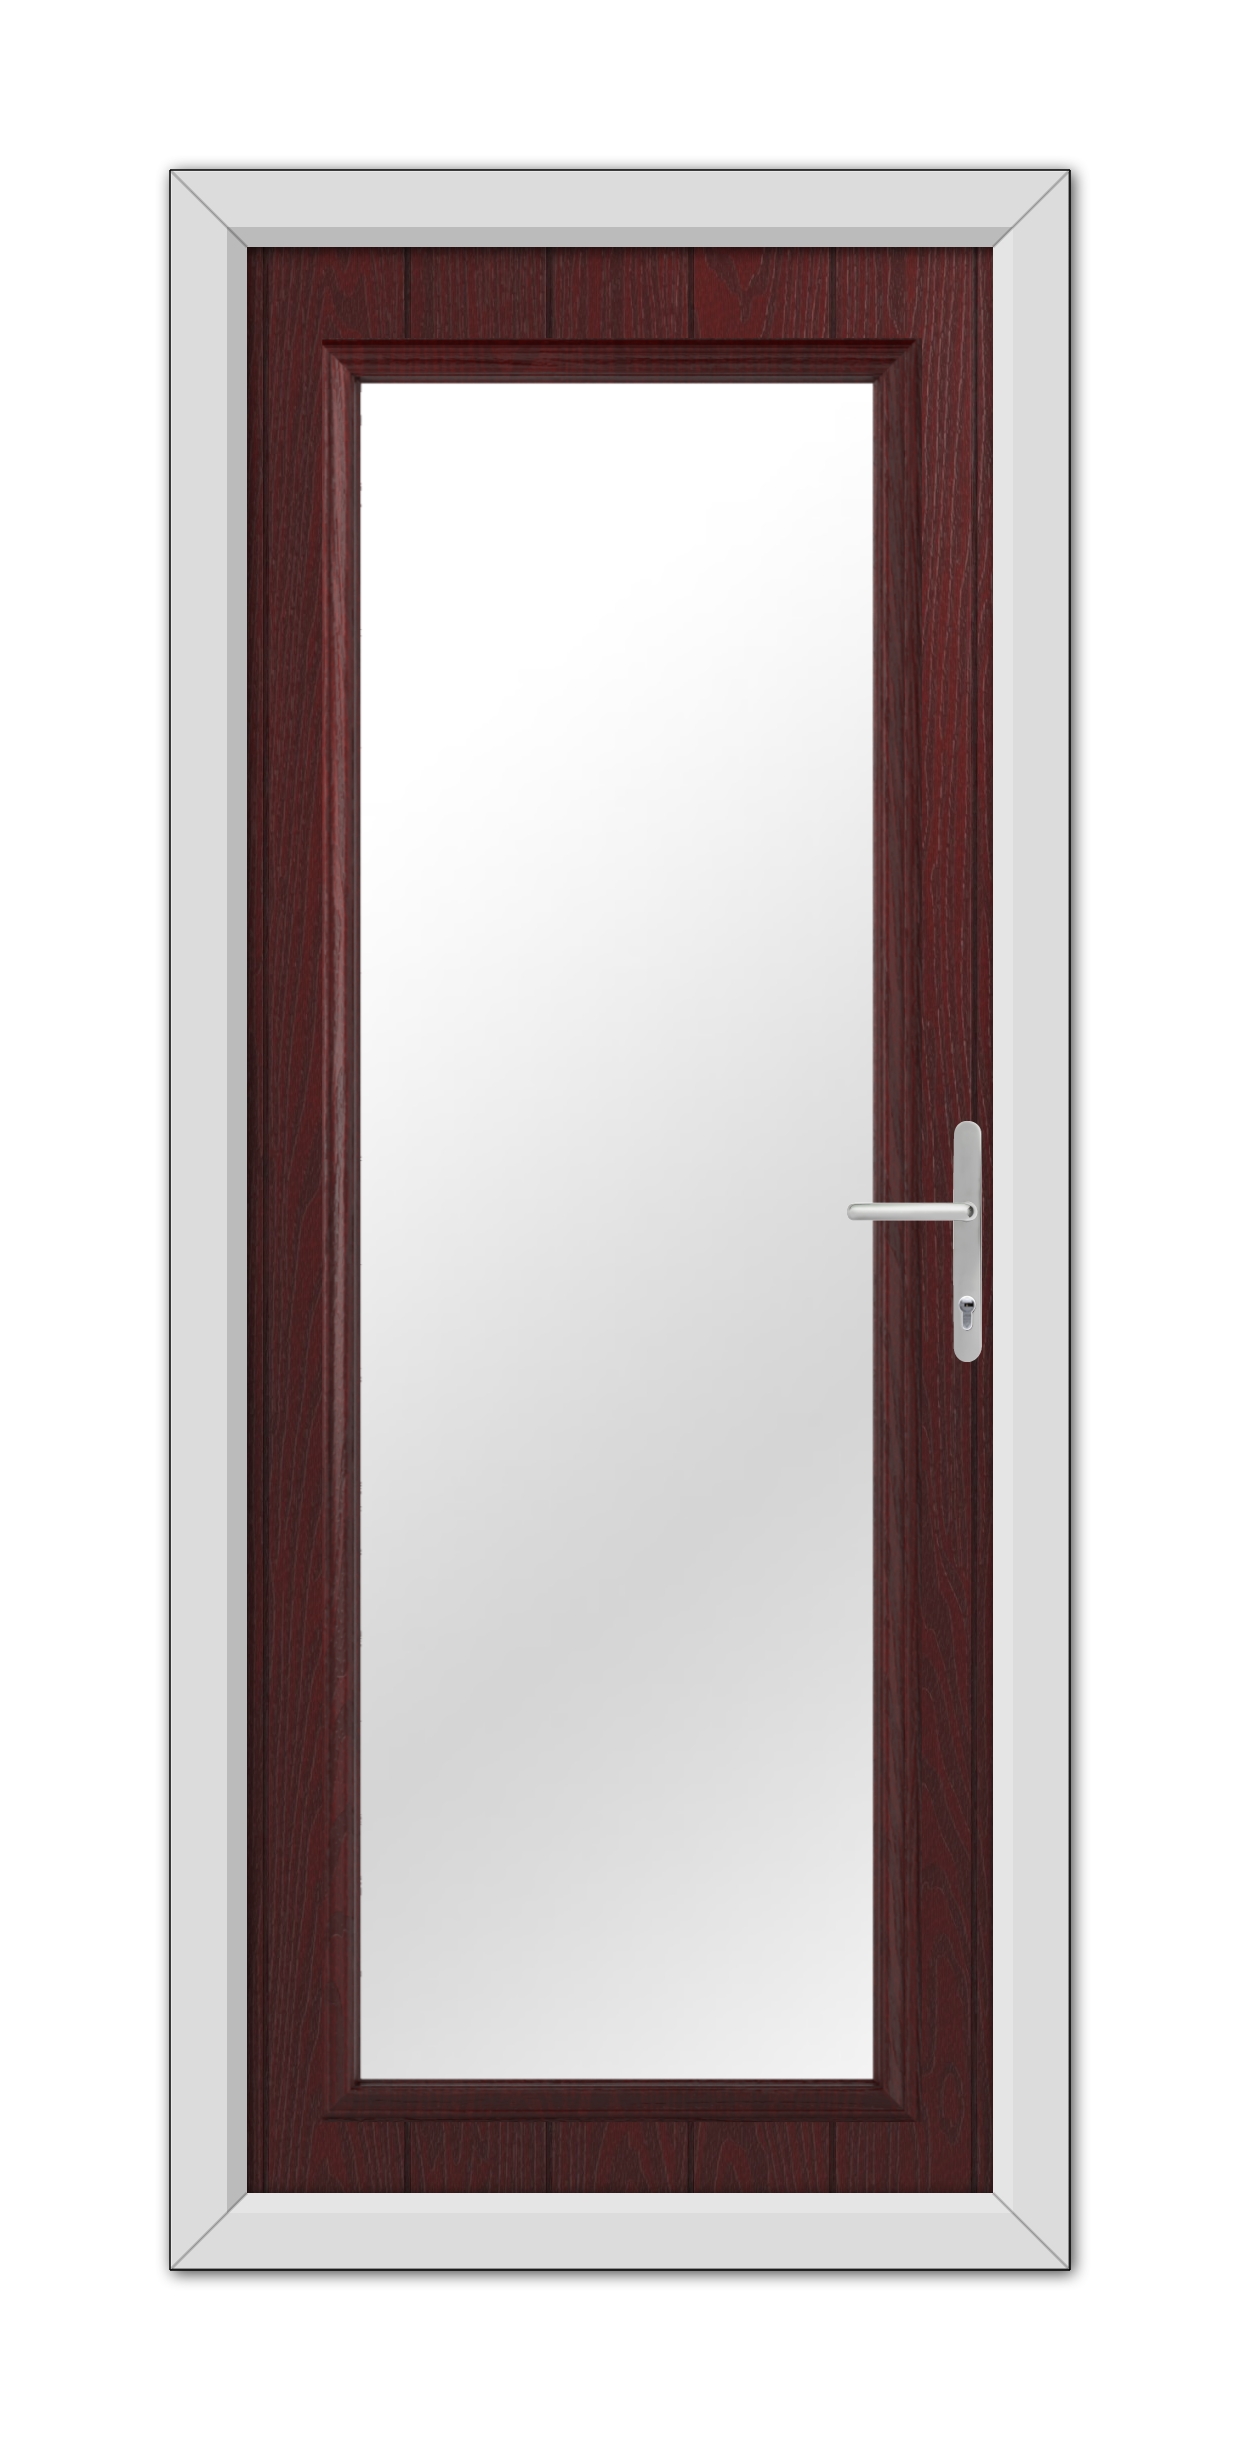 A modern Rosewood Hatton Composite Door with a dark wood finish and a white frame, featuring a rectangular design and equipped with a metal handle on the right side.